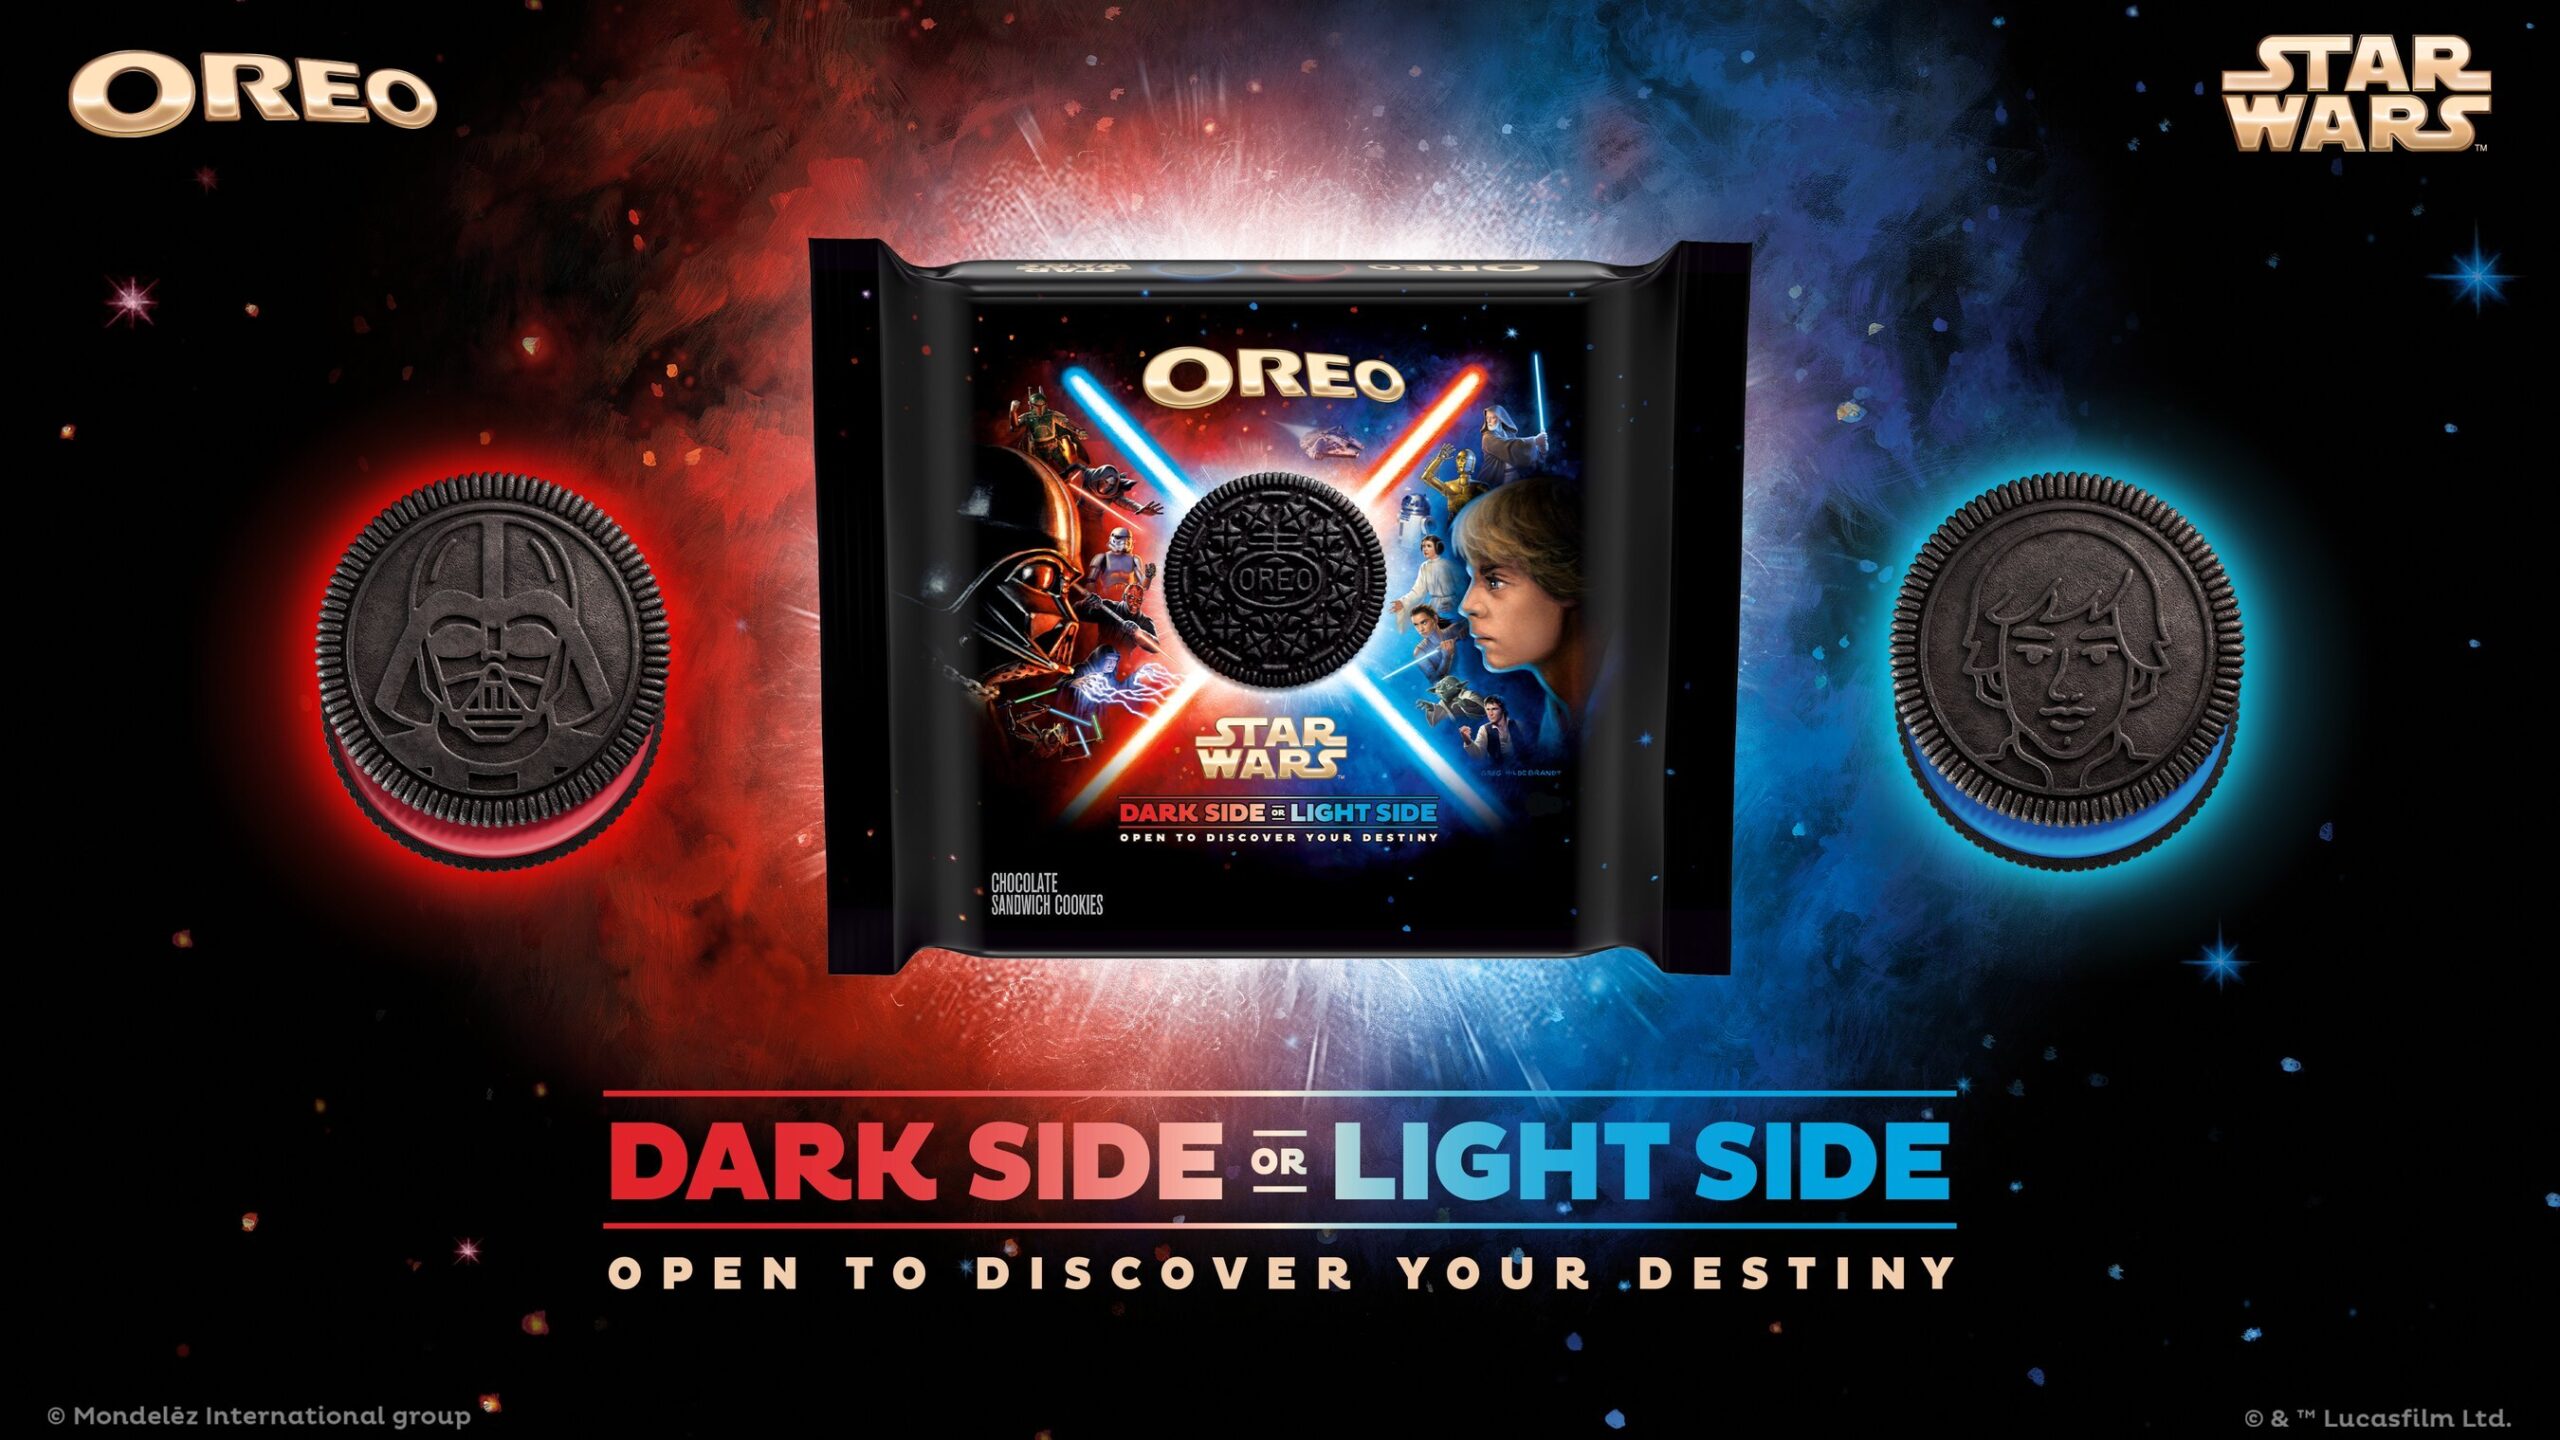 May the Force Be With Your Snack: OREO Launches Special Edition Star Wars Cookies!